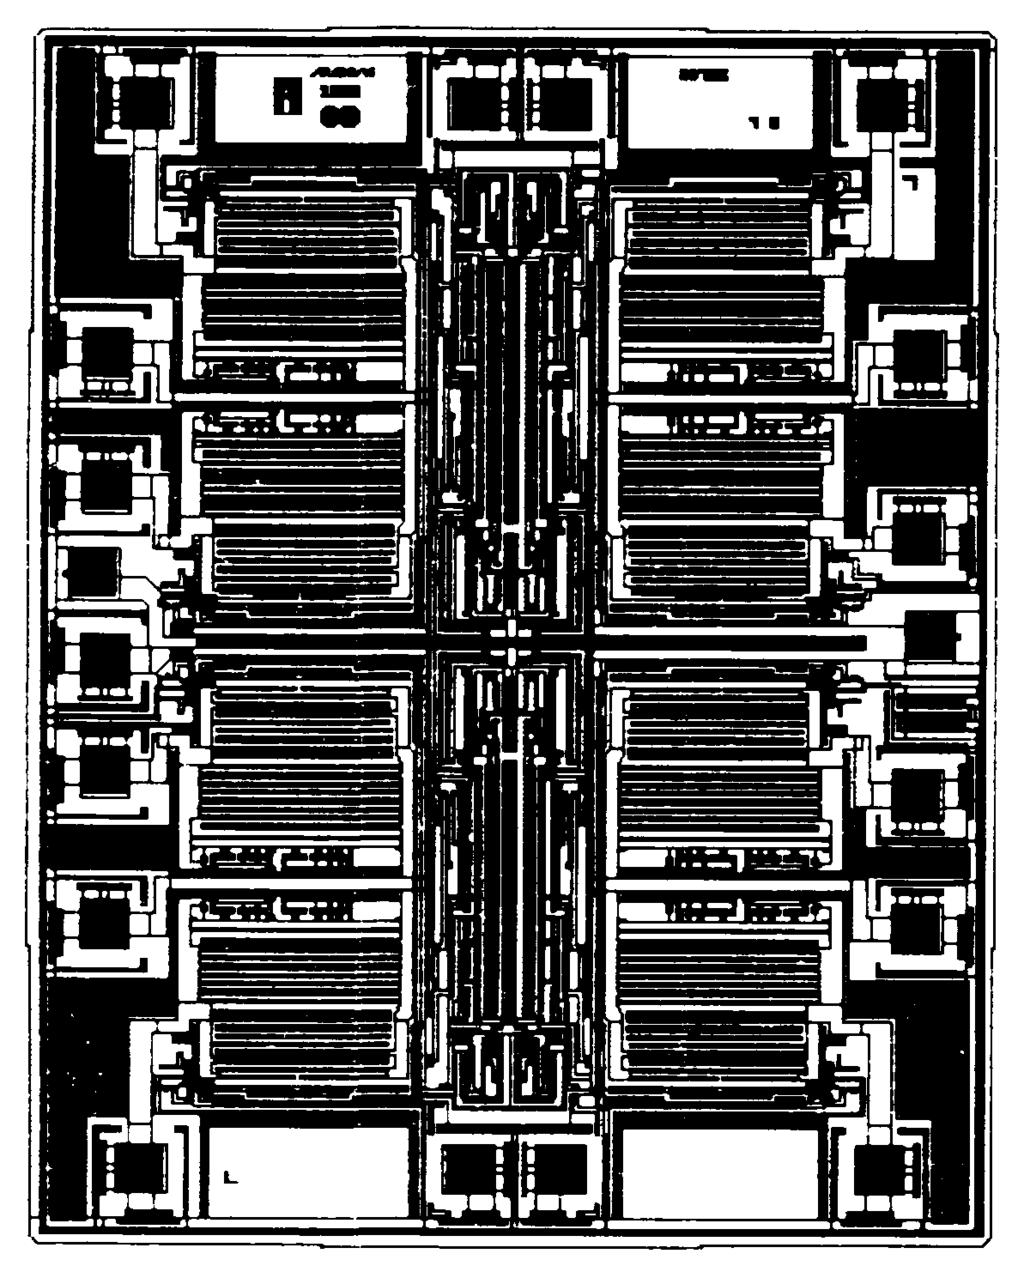 hip Topography O1 N1 NO1 IN1 IN4 NO4 O4 N4 0.128" (3.25mm) Package Information For the latest package outline information and land patterns, go to www.maxim-ic.com/packages.